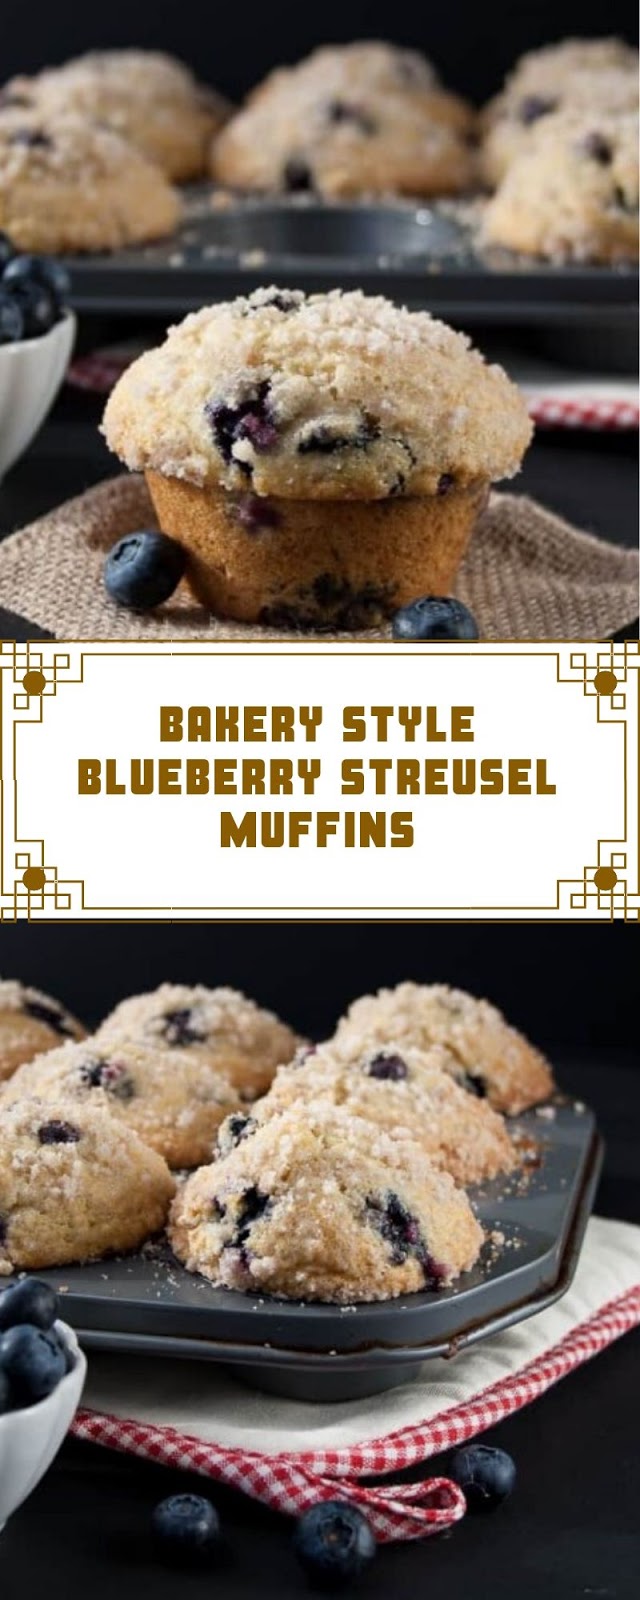 BAKERY STYLE BLUEBERRY STREUSEL MUFFINS